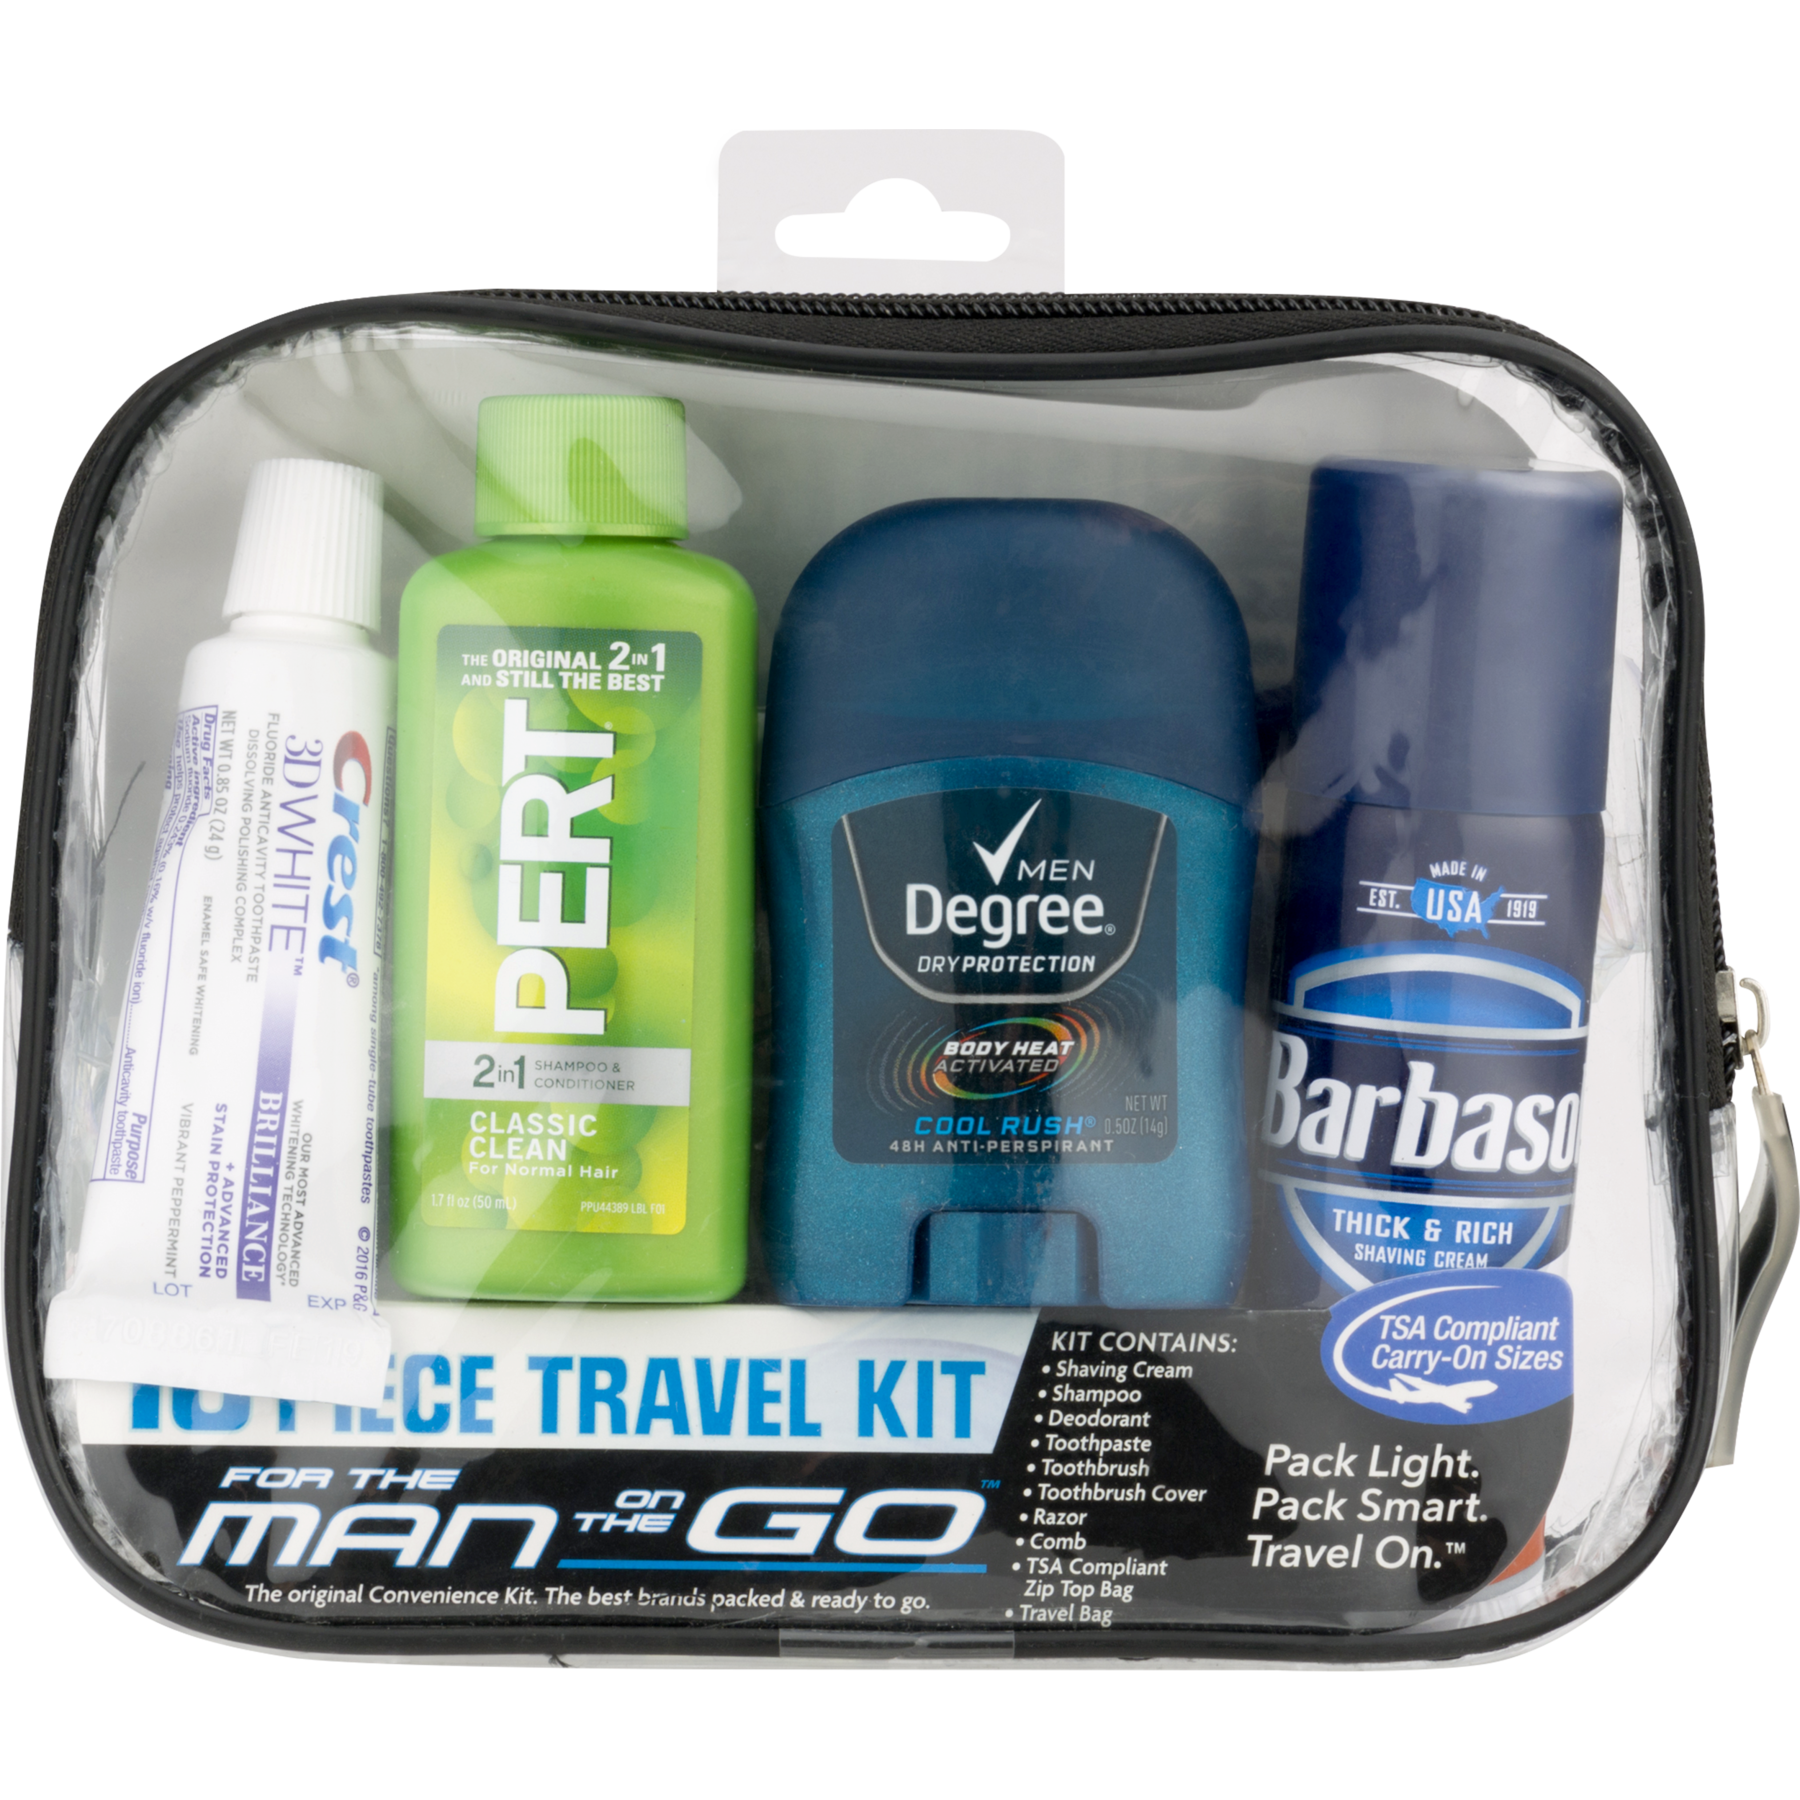 Convenience Kits International Men's Deluxe 10 Piece Travel Kit, TSA Compliant, in Reusable Clear Zippered Bag Featuring: Barbasol Shave Cream - image 5 of 5